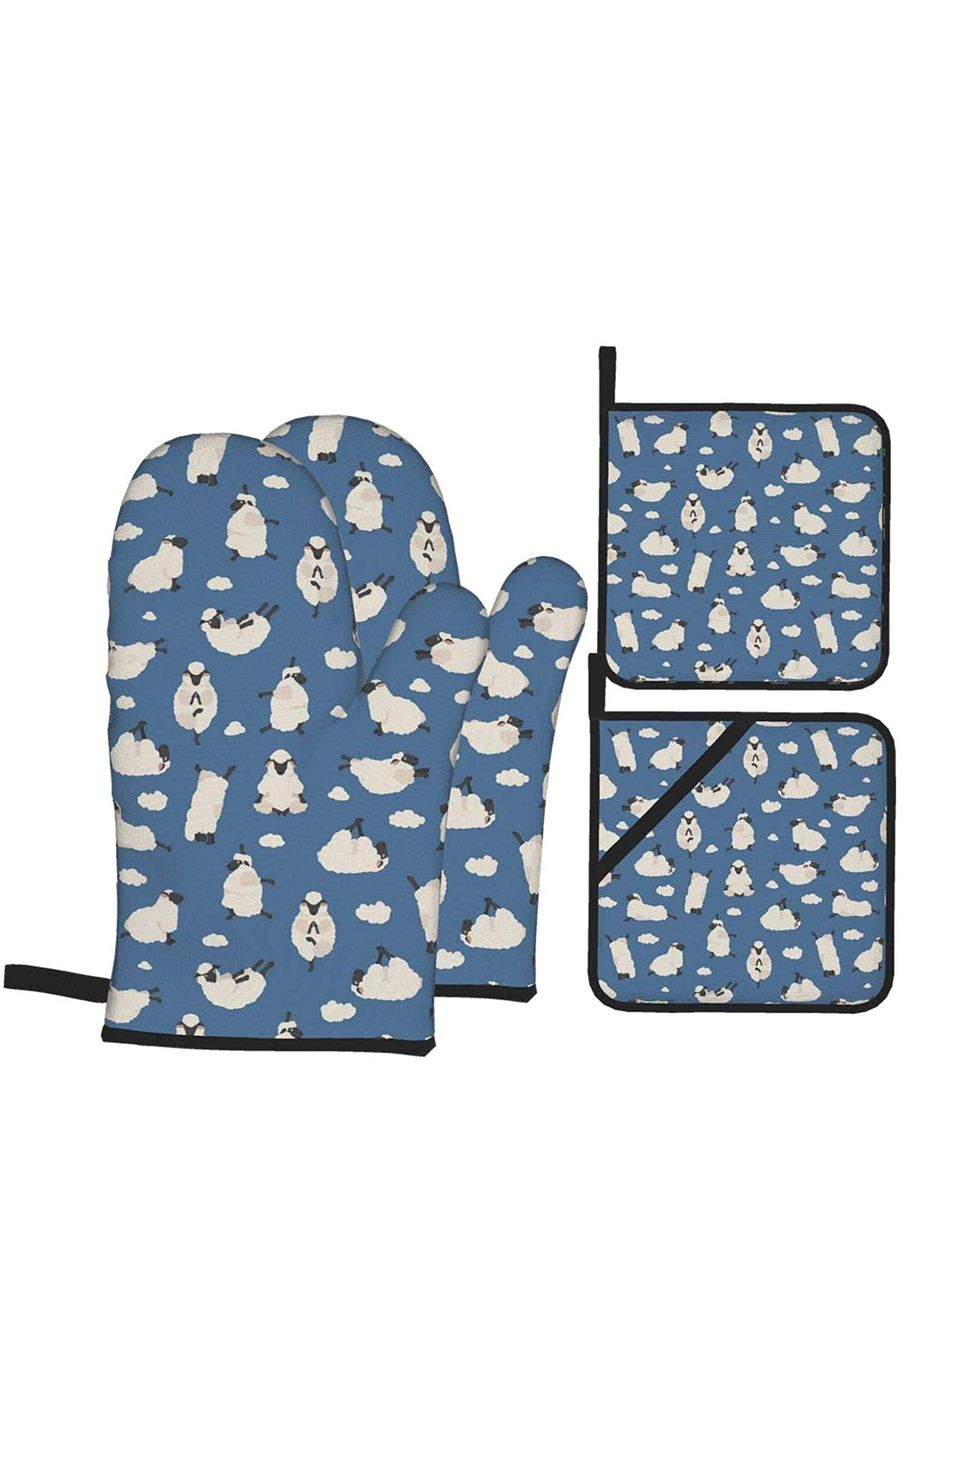 Sheep Yoga Heat Resistant Kitchen Cooking Oven Gloves and Potholders